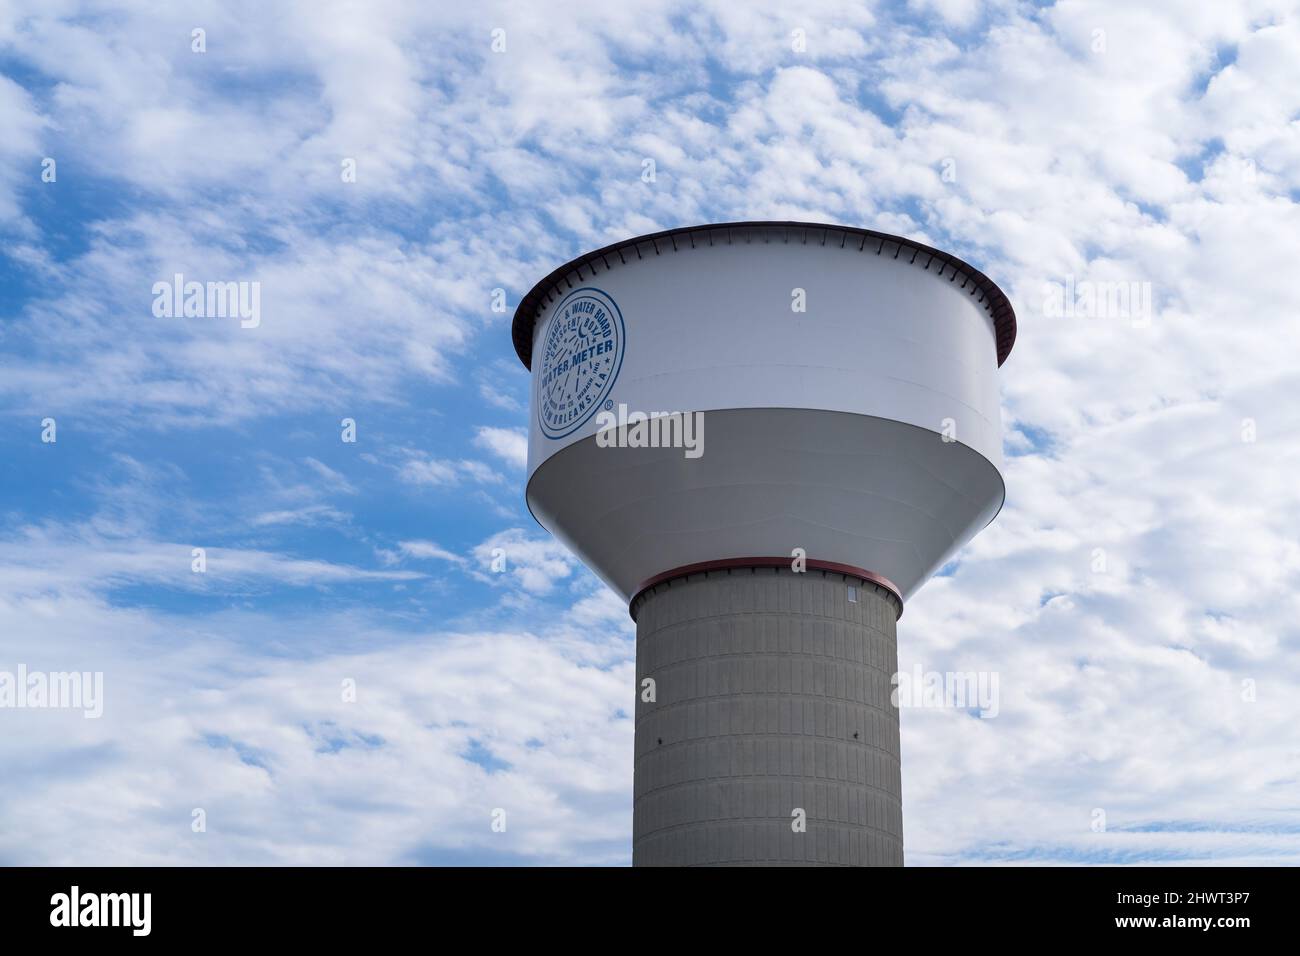 NEW ORLEANS, LA, USA - MARCH 3, 2022: New Orleans Sewerage and Water Board water tower with clouds and blue sky in the background Stock Photo